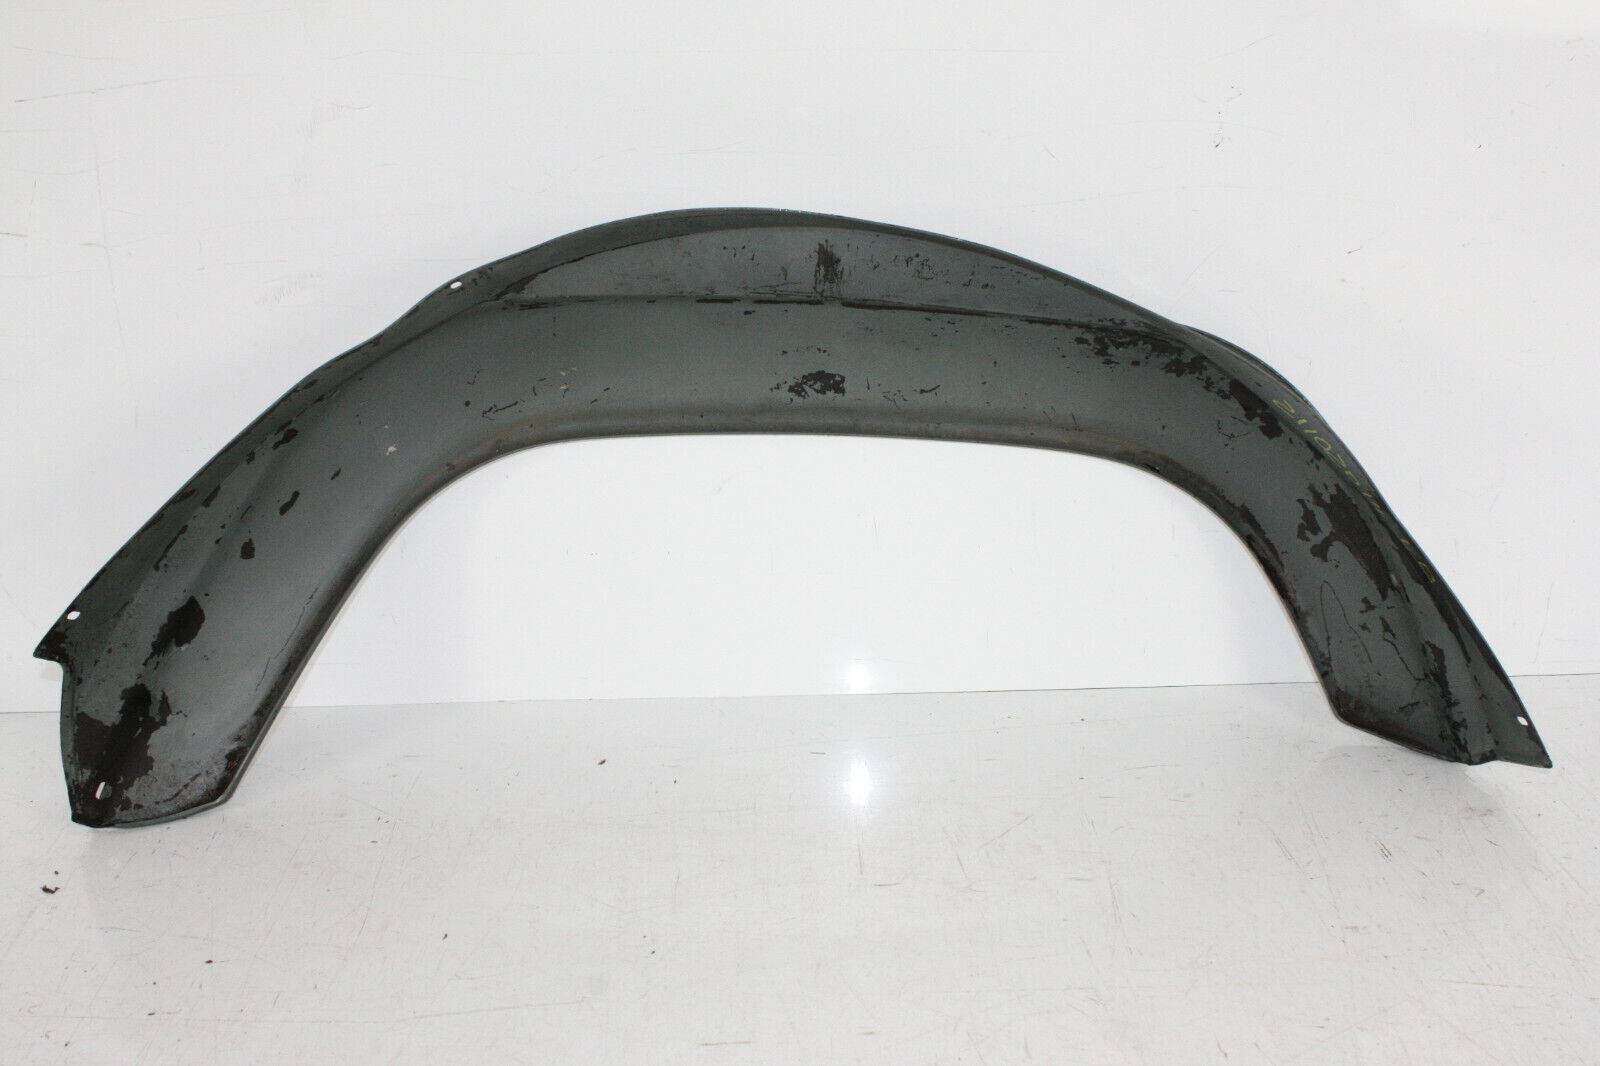 Land-Rover-Defender-Wheel-Arch-Flare-Spat-Front-Left-Painted-Type-Genuine-176479527707-4